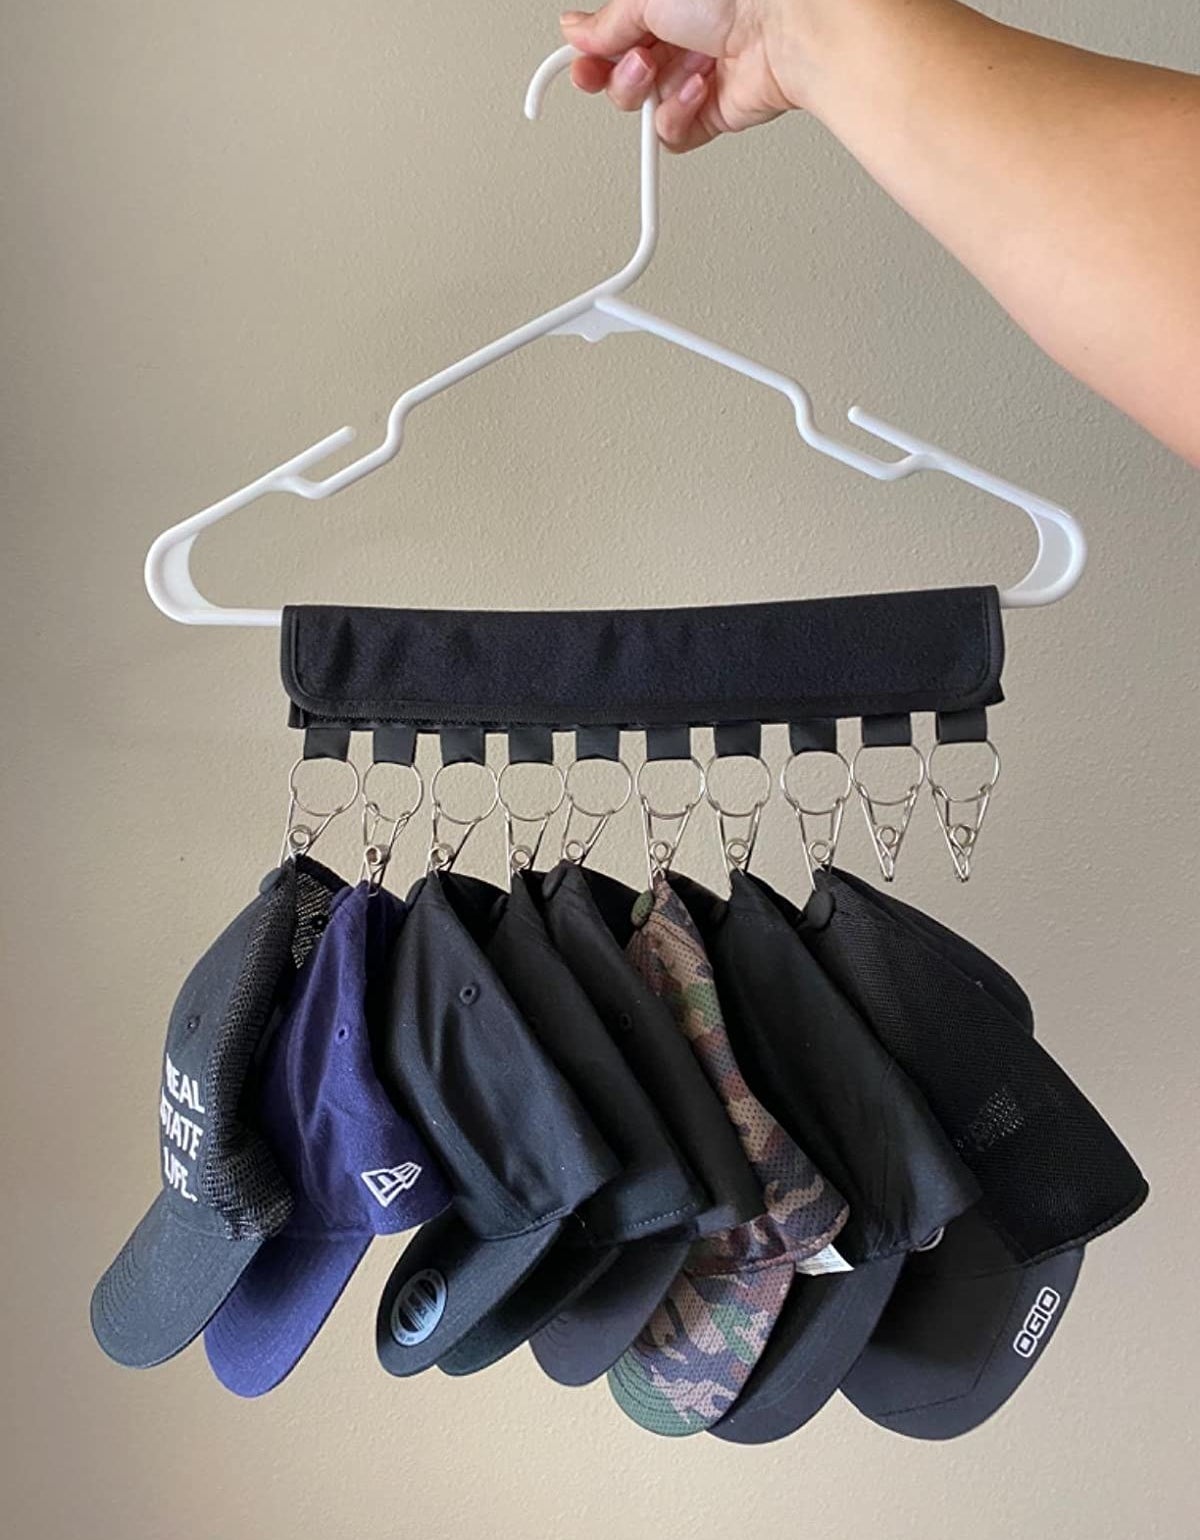 reviewer photo showing hat organizer in black